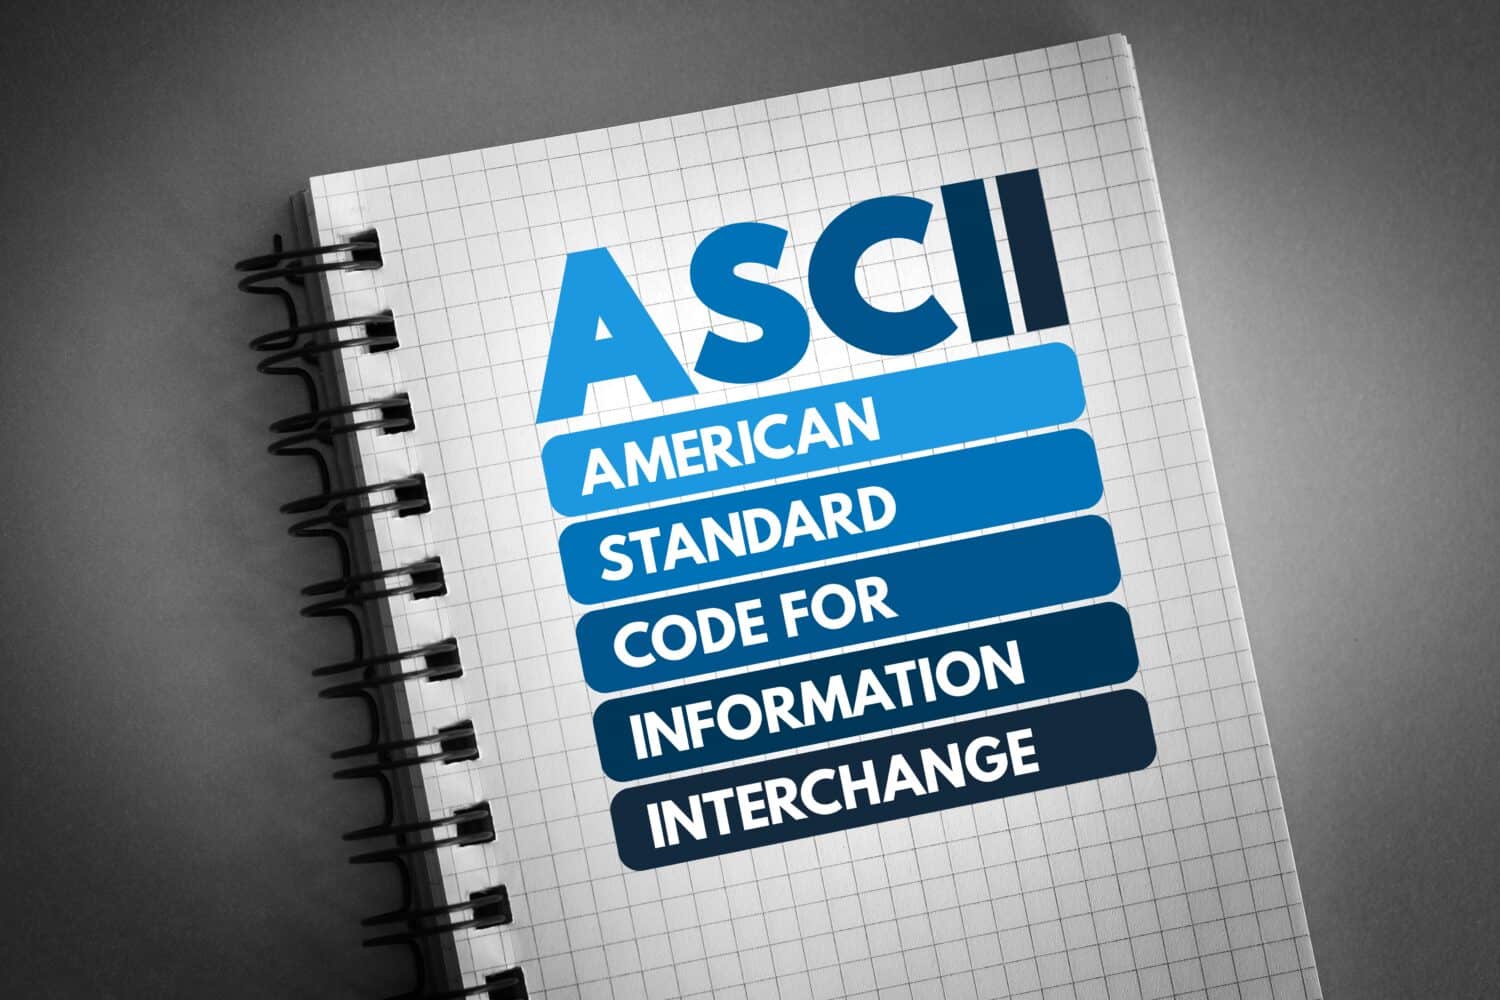 ASCII - American Standard Code for Information Interchange acronym on notepad, technology concept background